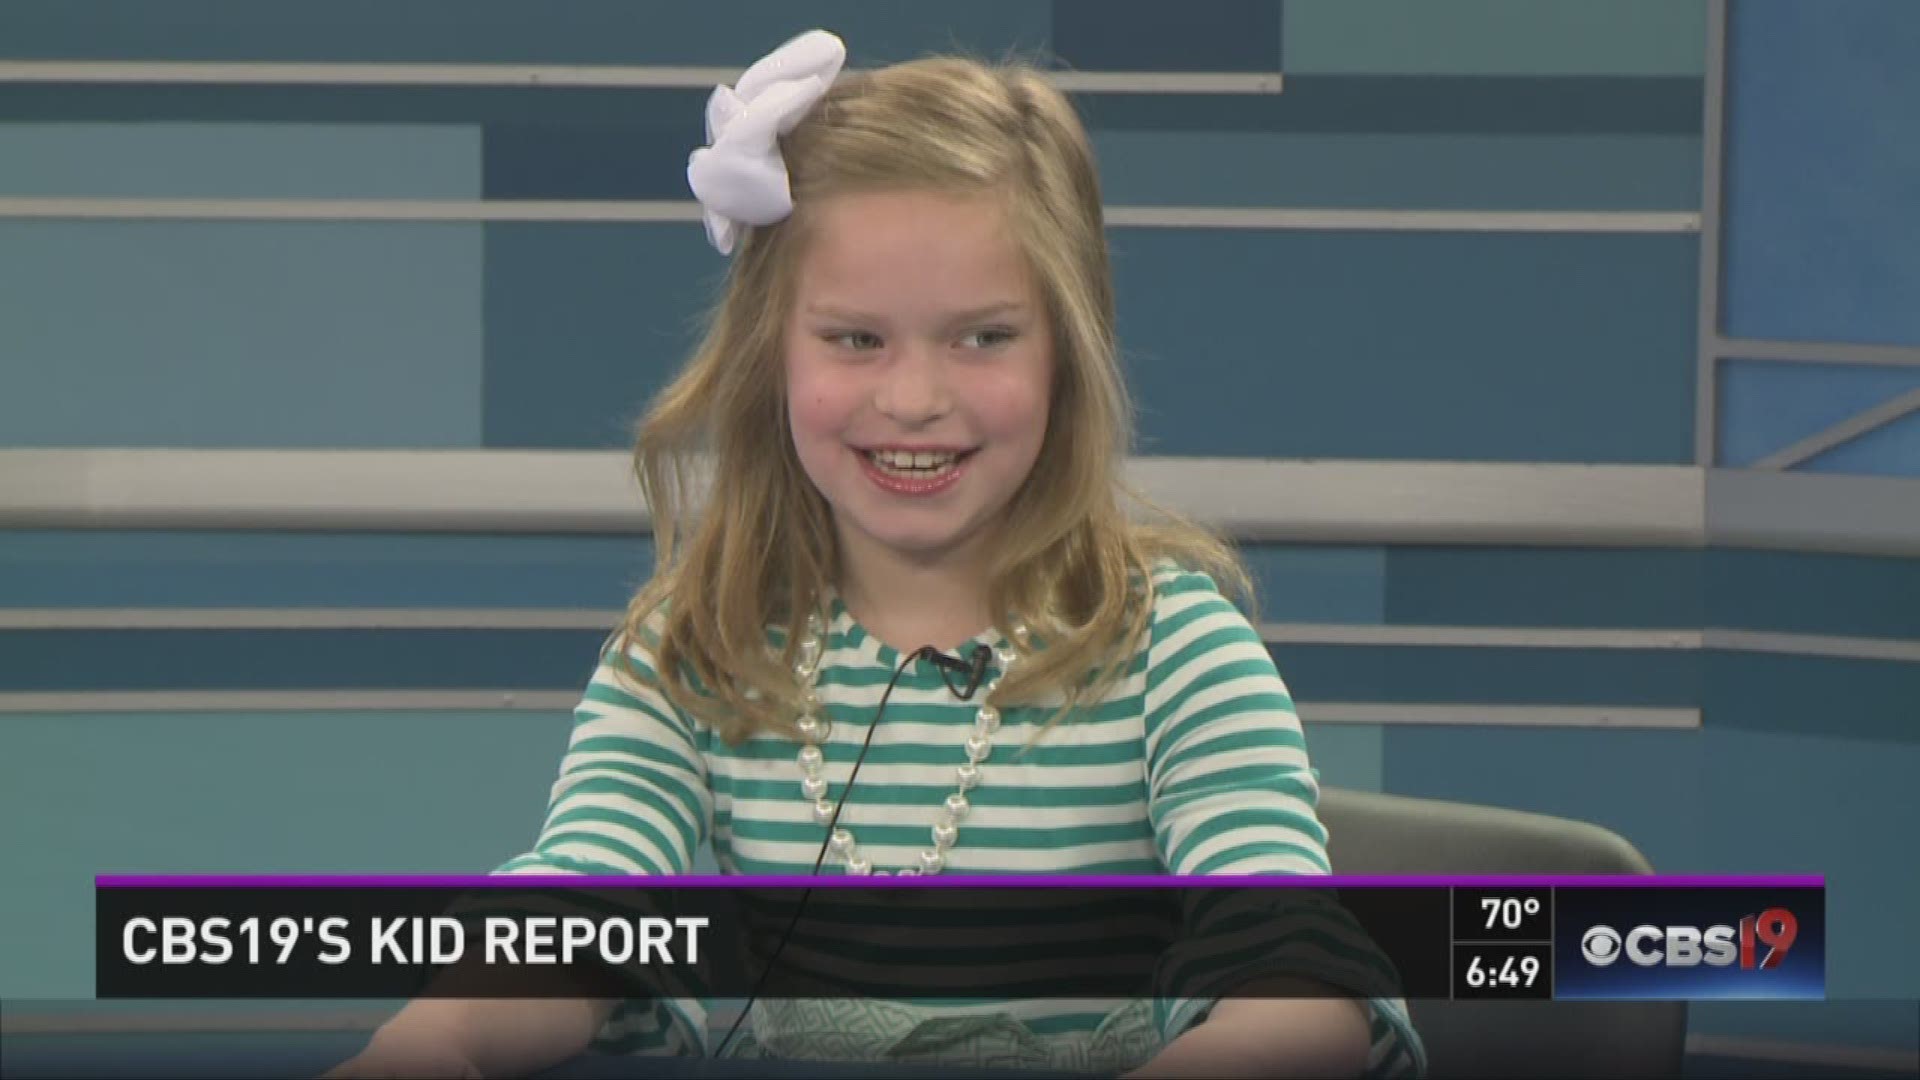 This week's Kid Report is from Emily Rivers. She's a third grade student at Wise Elementary in Chapel Hill. Every week. she gets to go to dance, art, music, and drama.